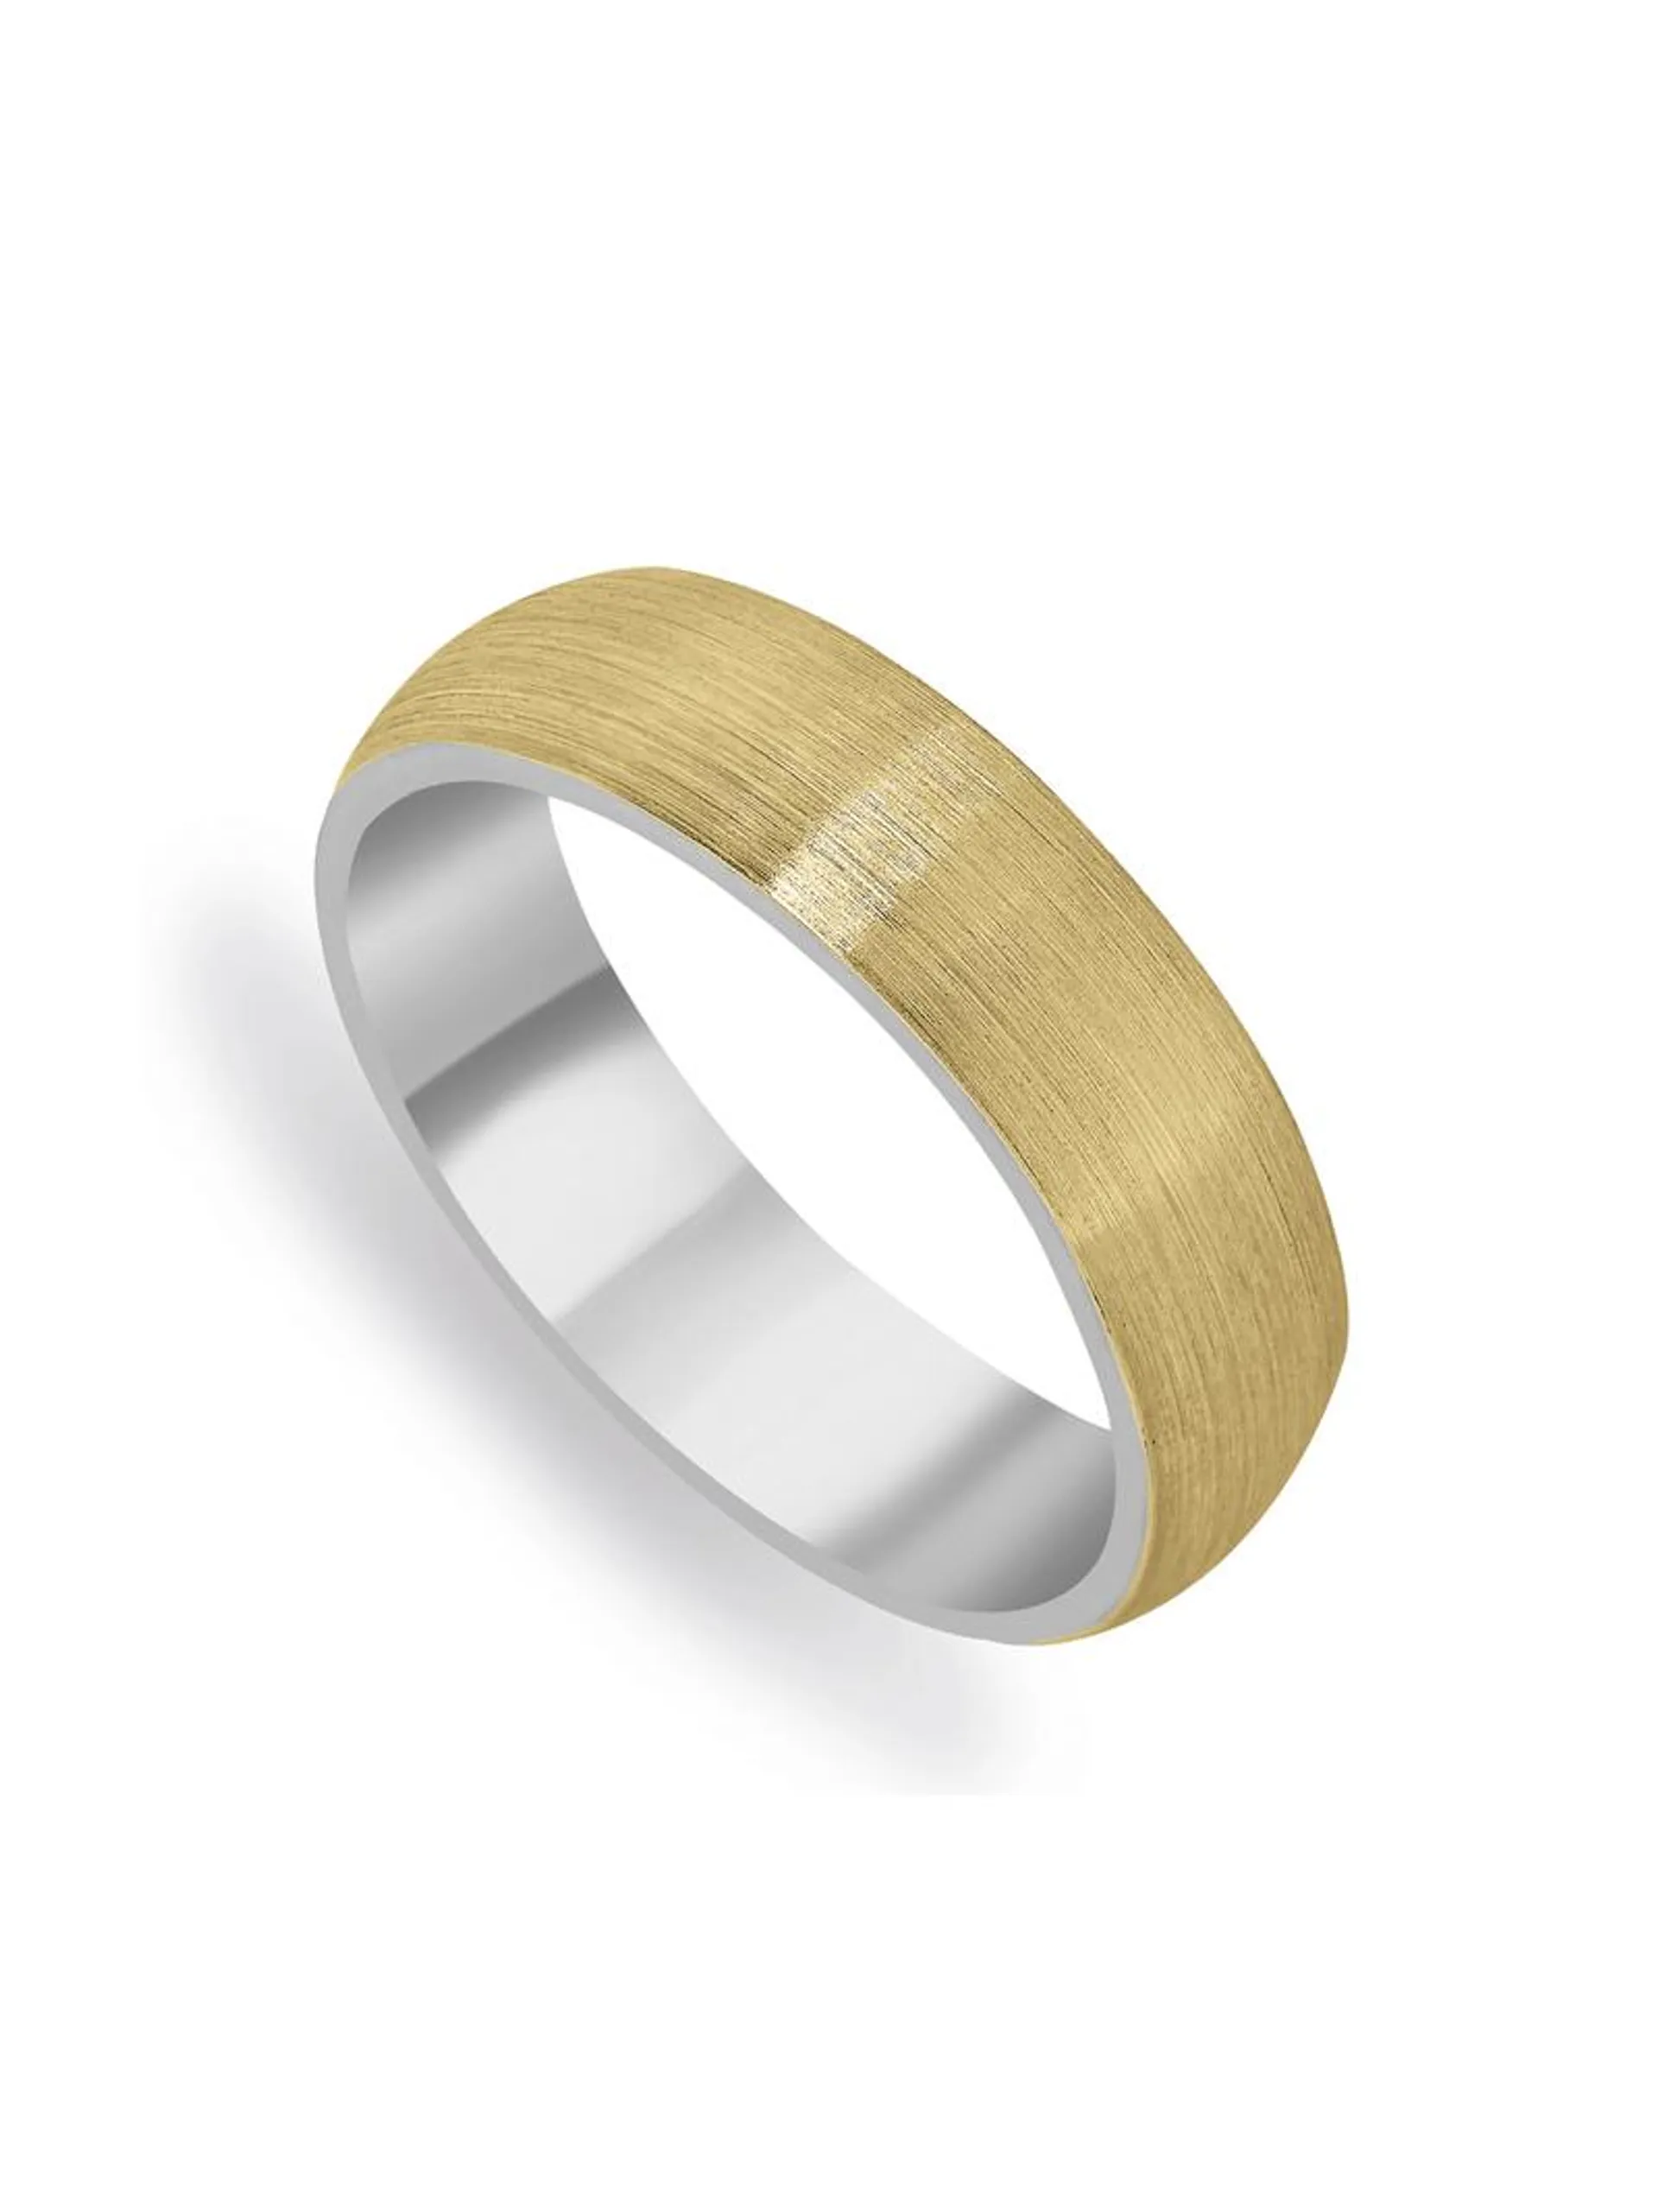 Domed Brushed 6mm Argentum & 9ct Yellow Gold Wedding Band